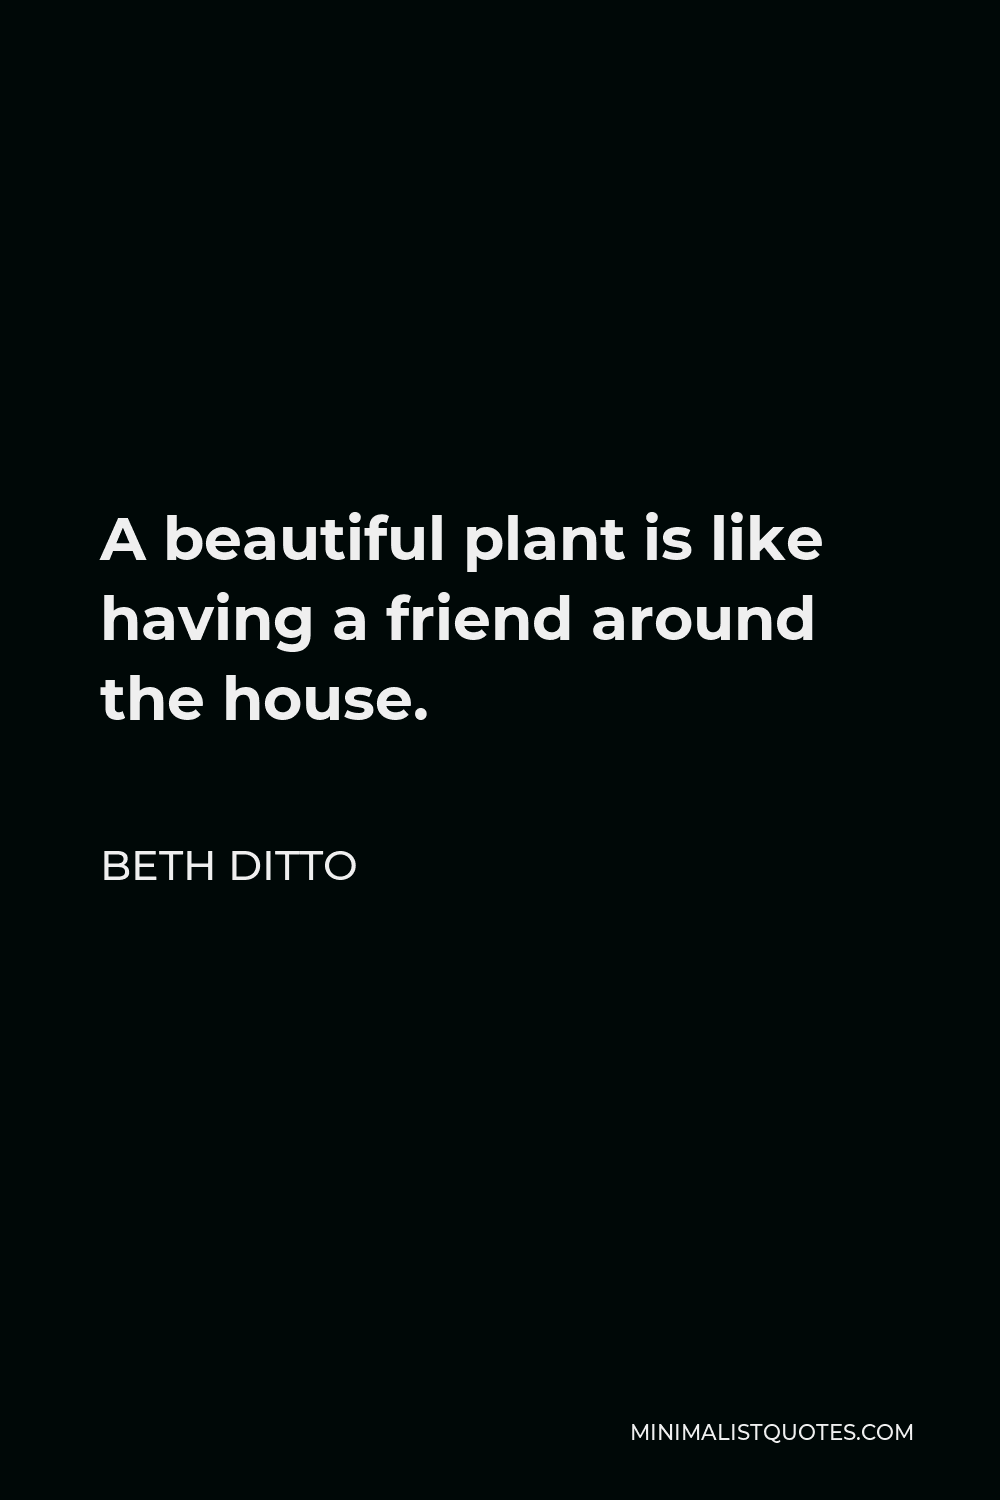 Beth Ditto Quote - A beautiful plant is like having a friend around the house.